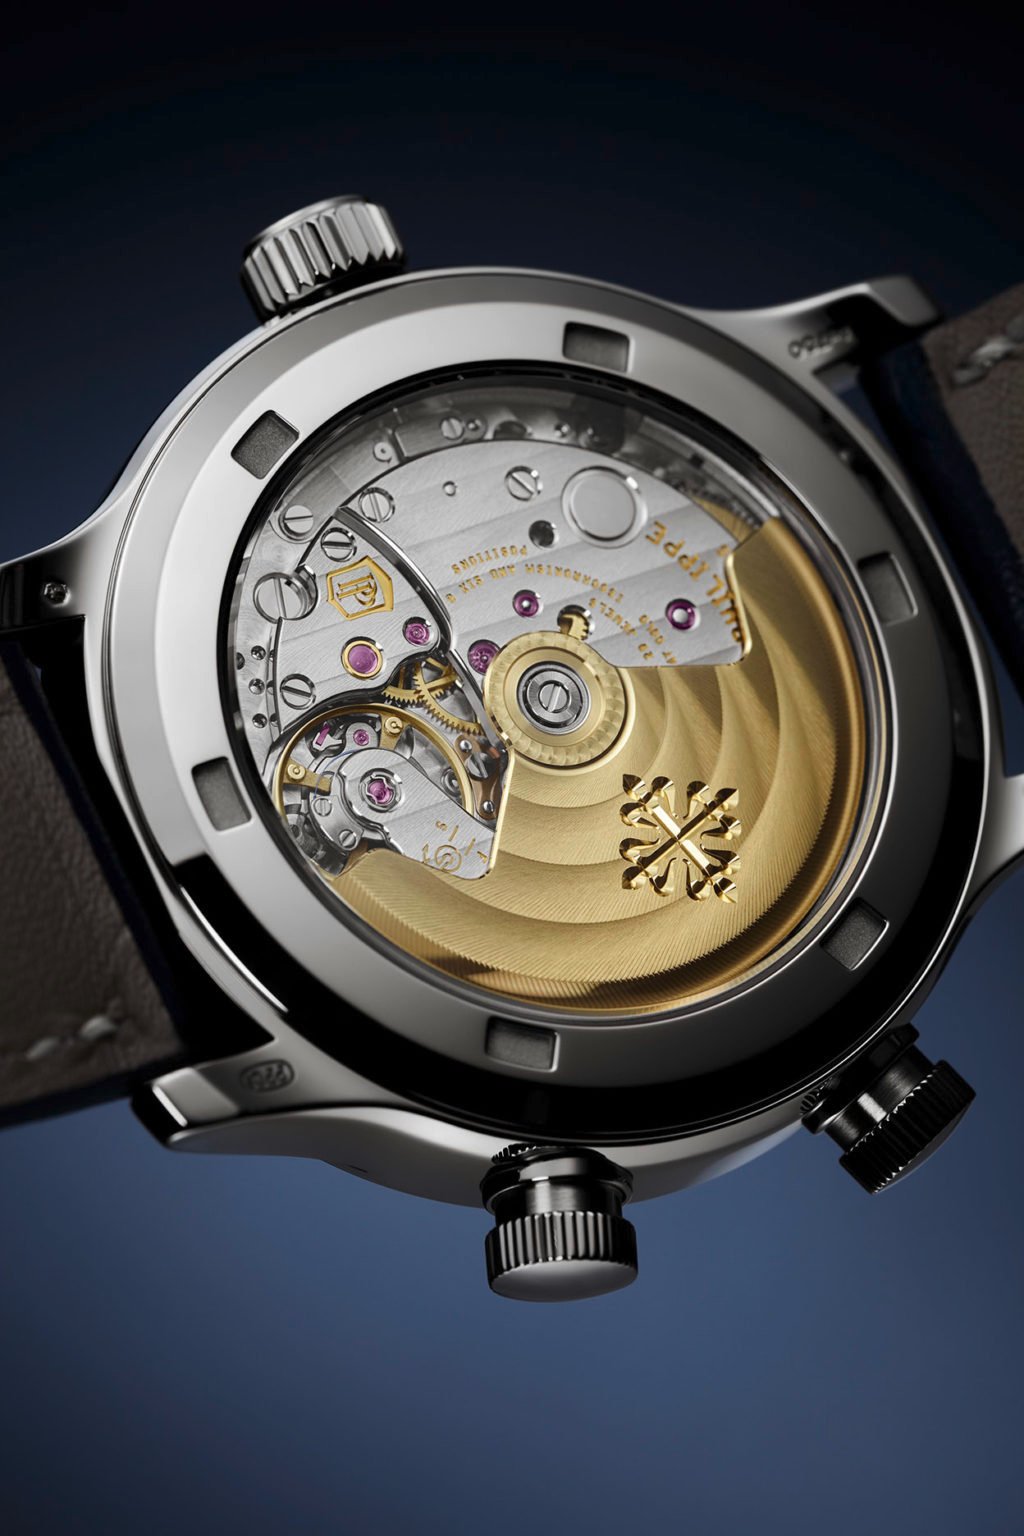 This Week in Watches: September 19, 2020 Enjoyable Edition